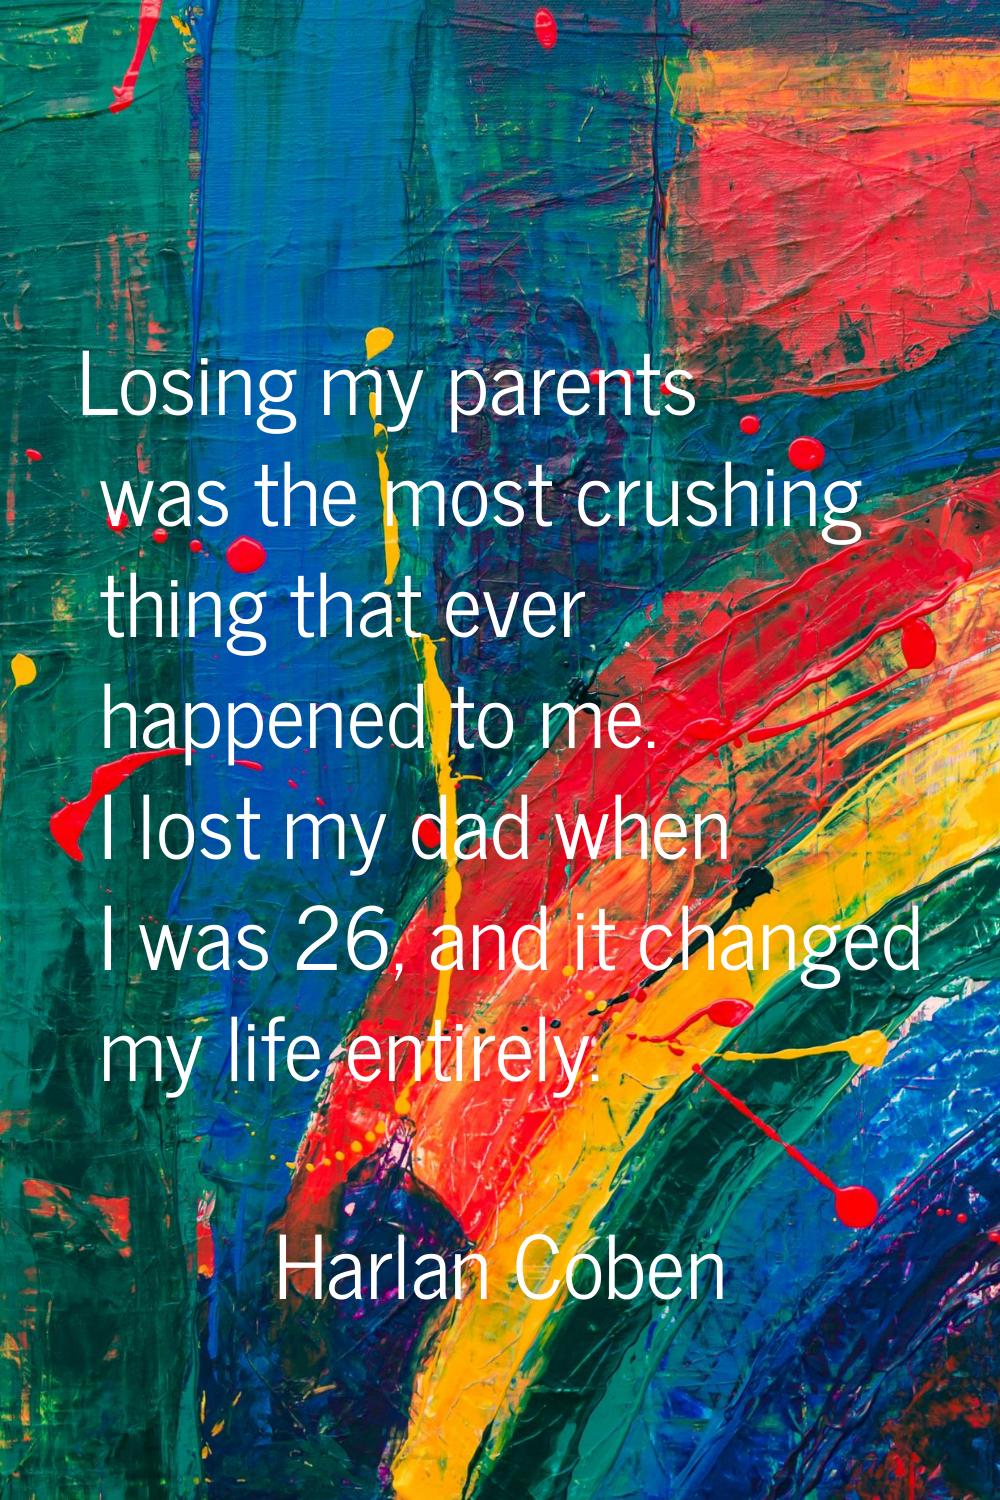 Losing my parents was the most crushing thing that ever happened to me. I lost my dad when I was 26